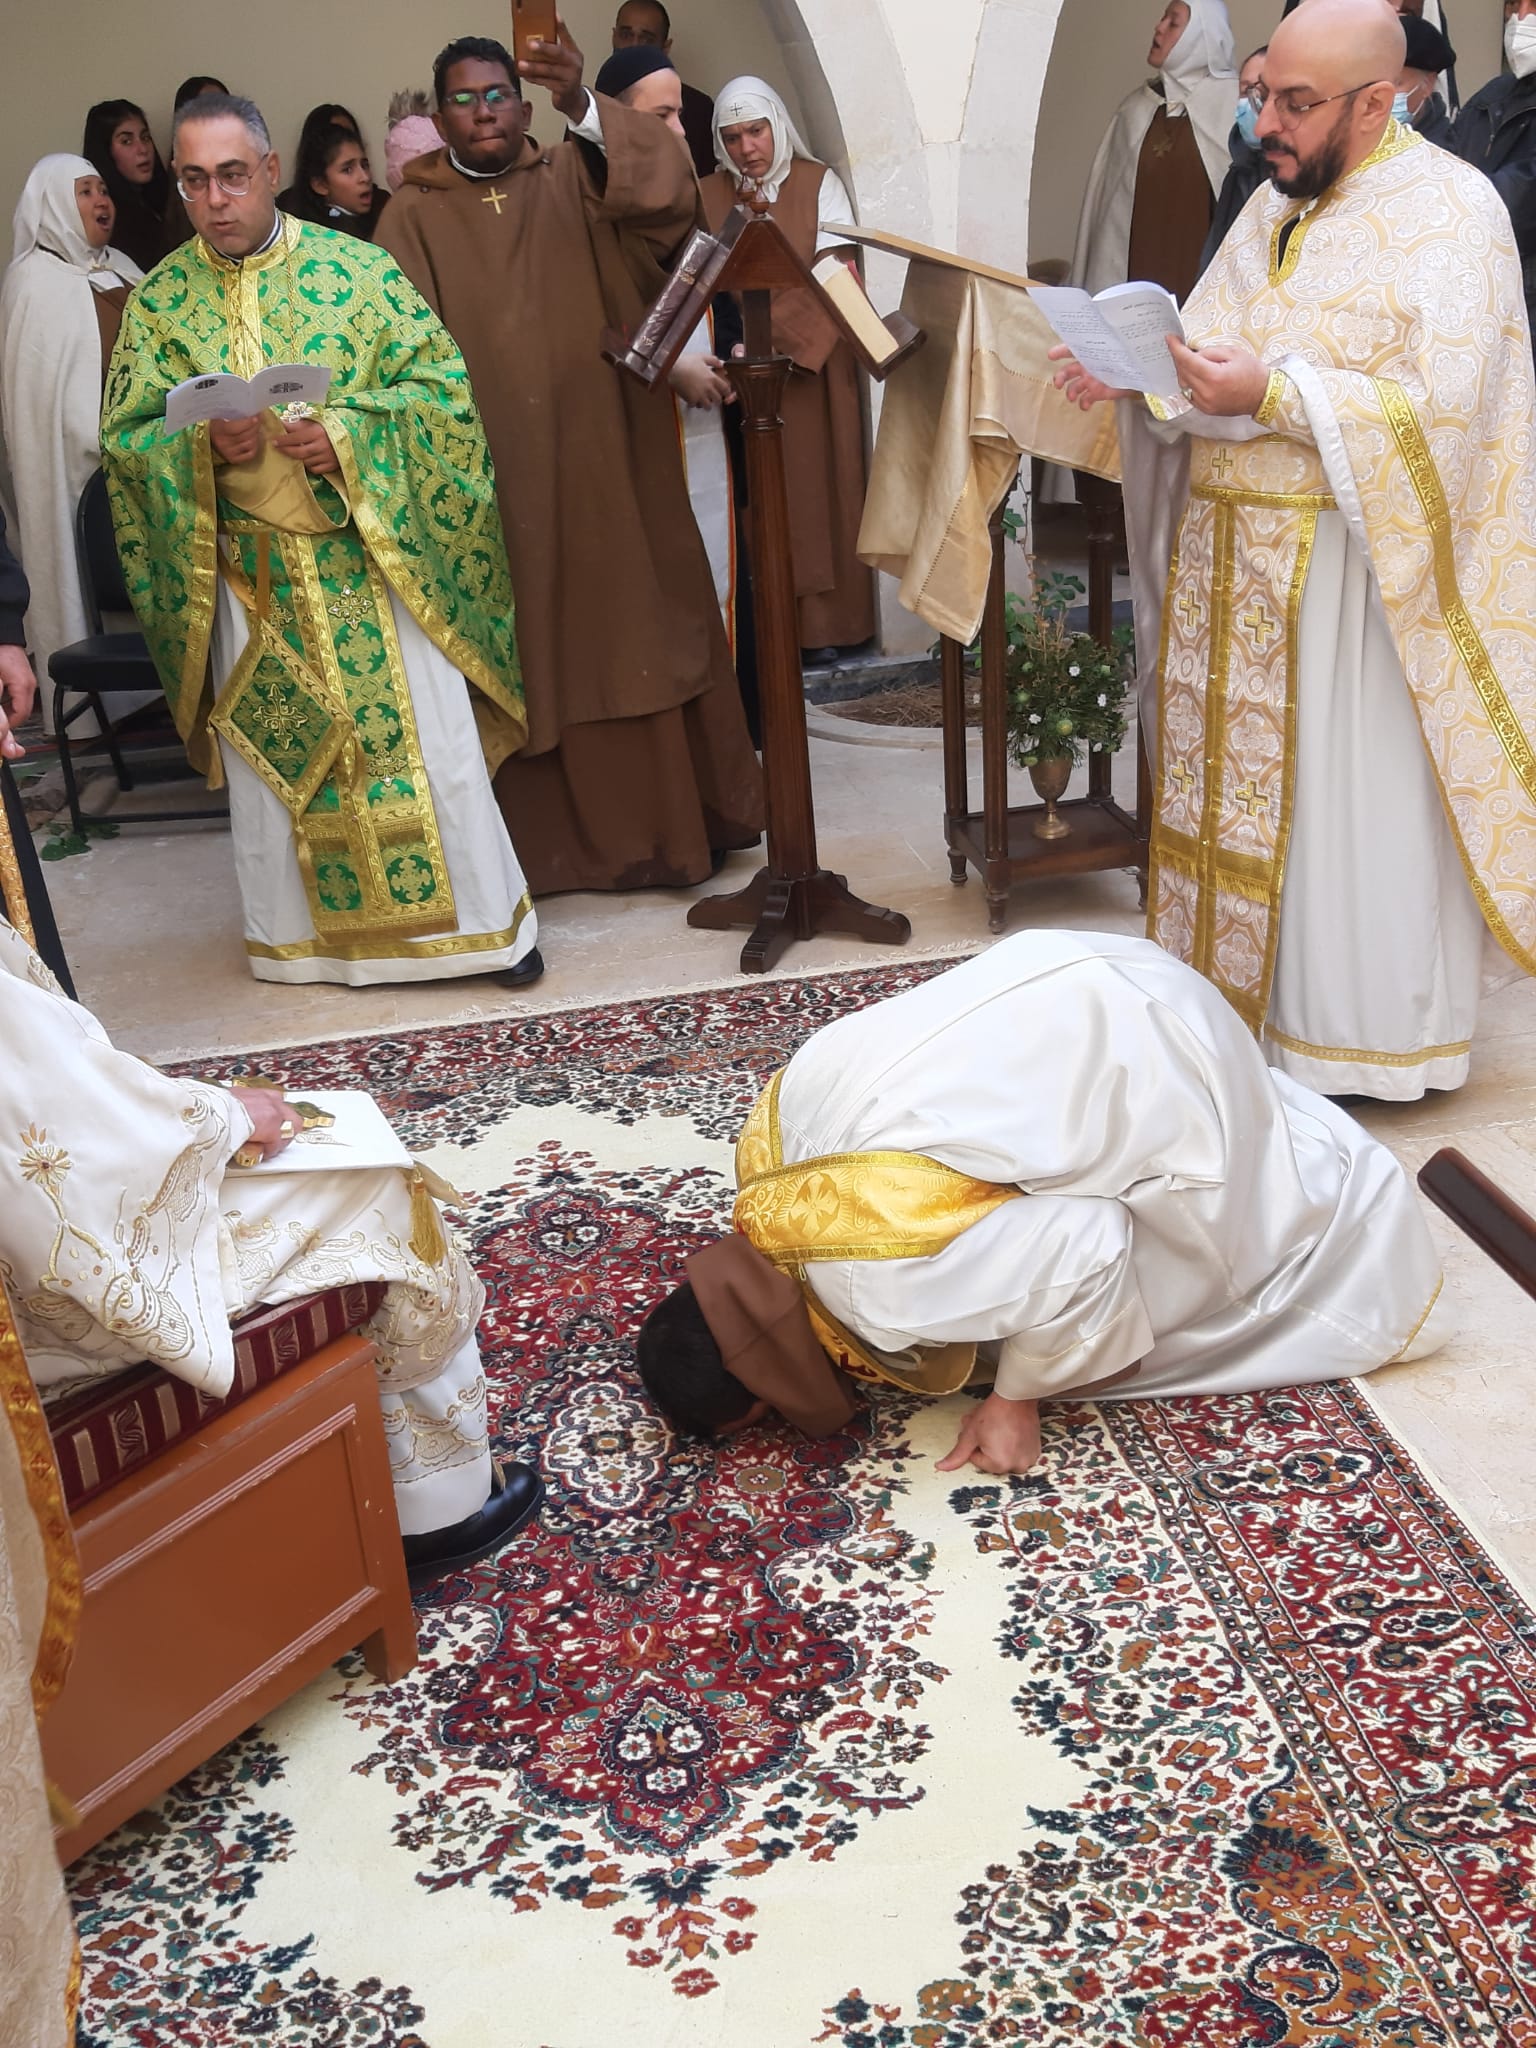 Attending an Ordination in Syria